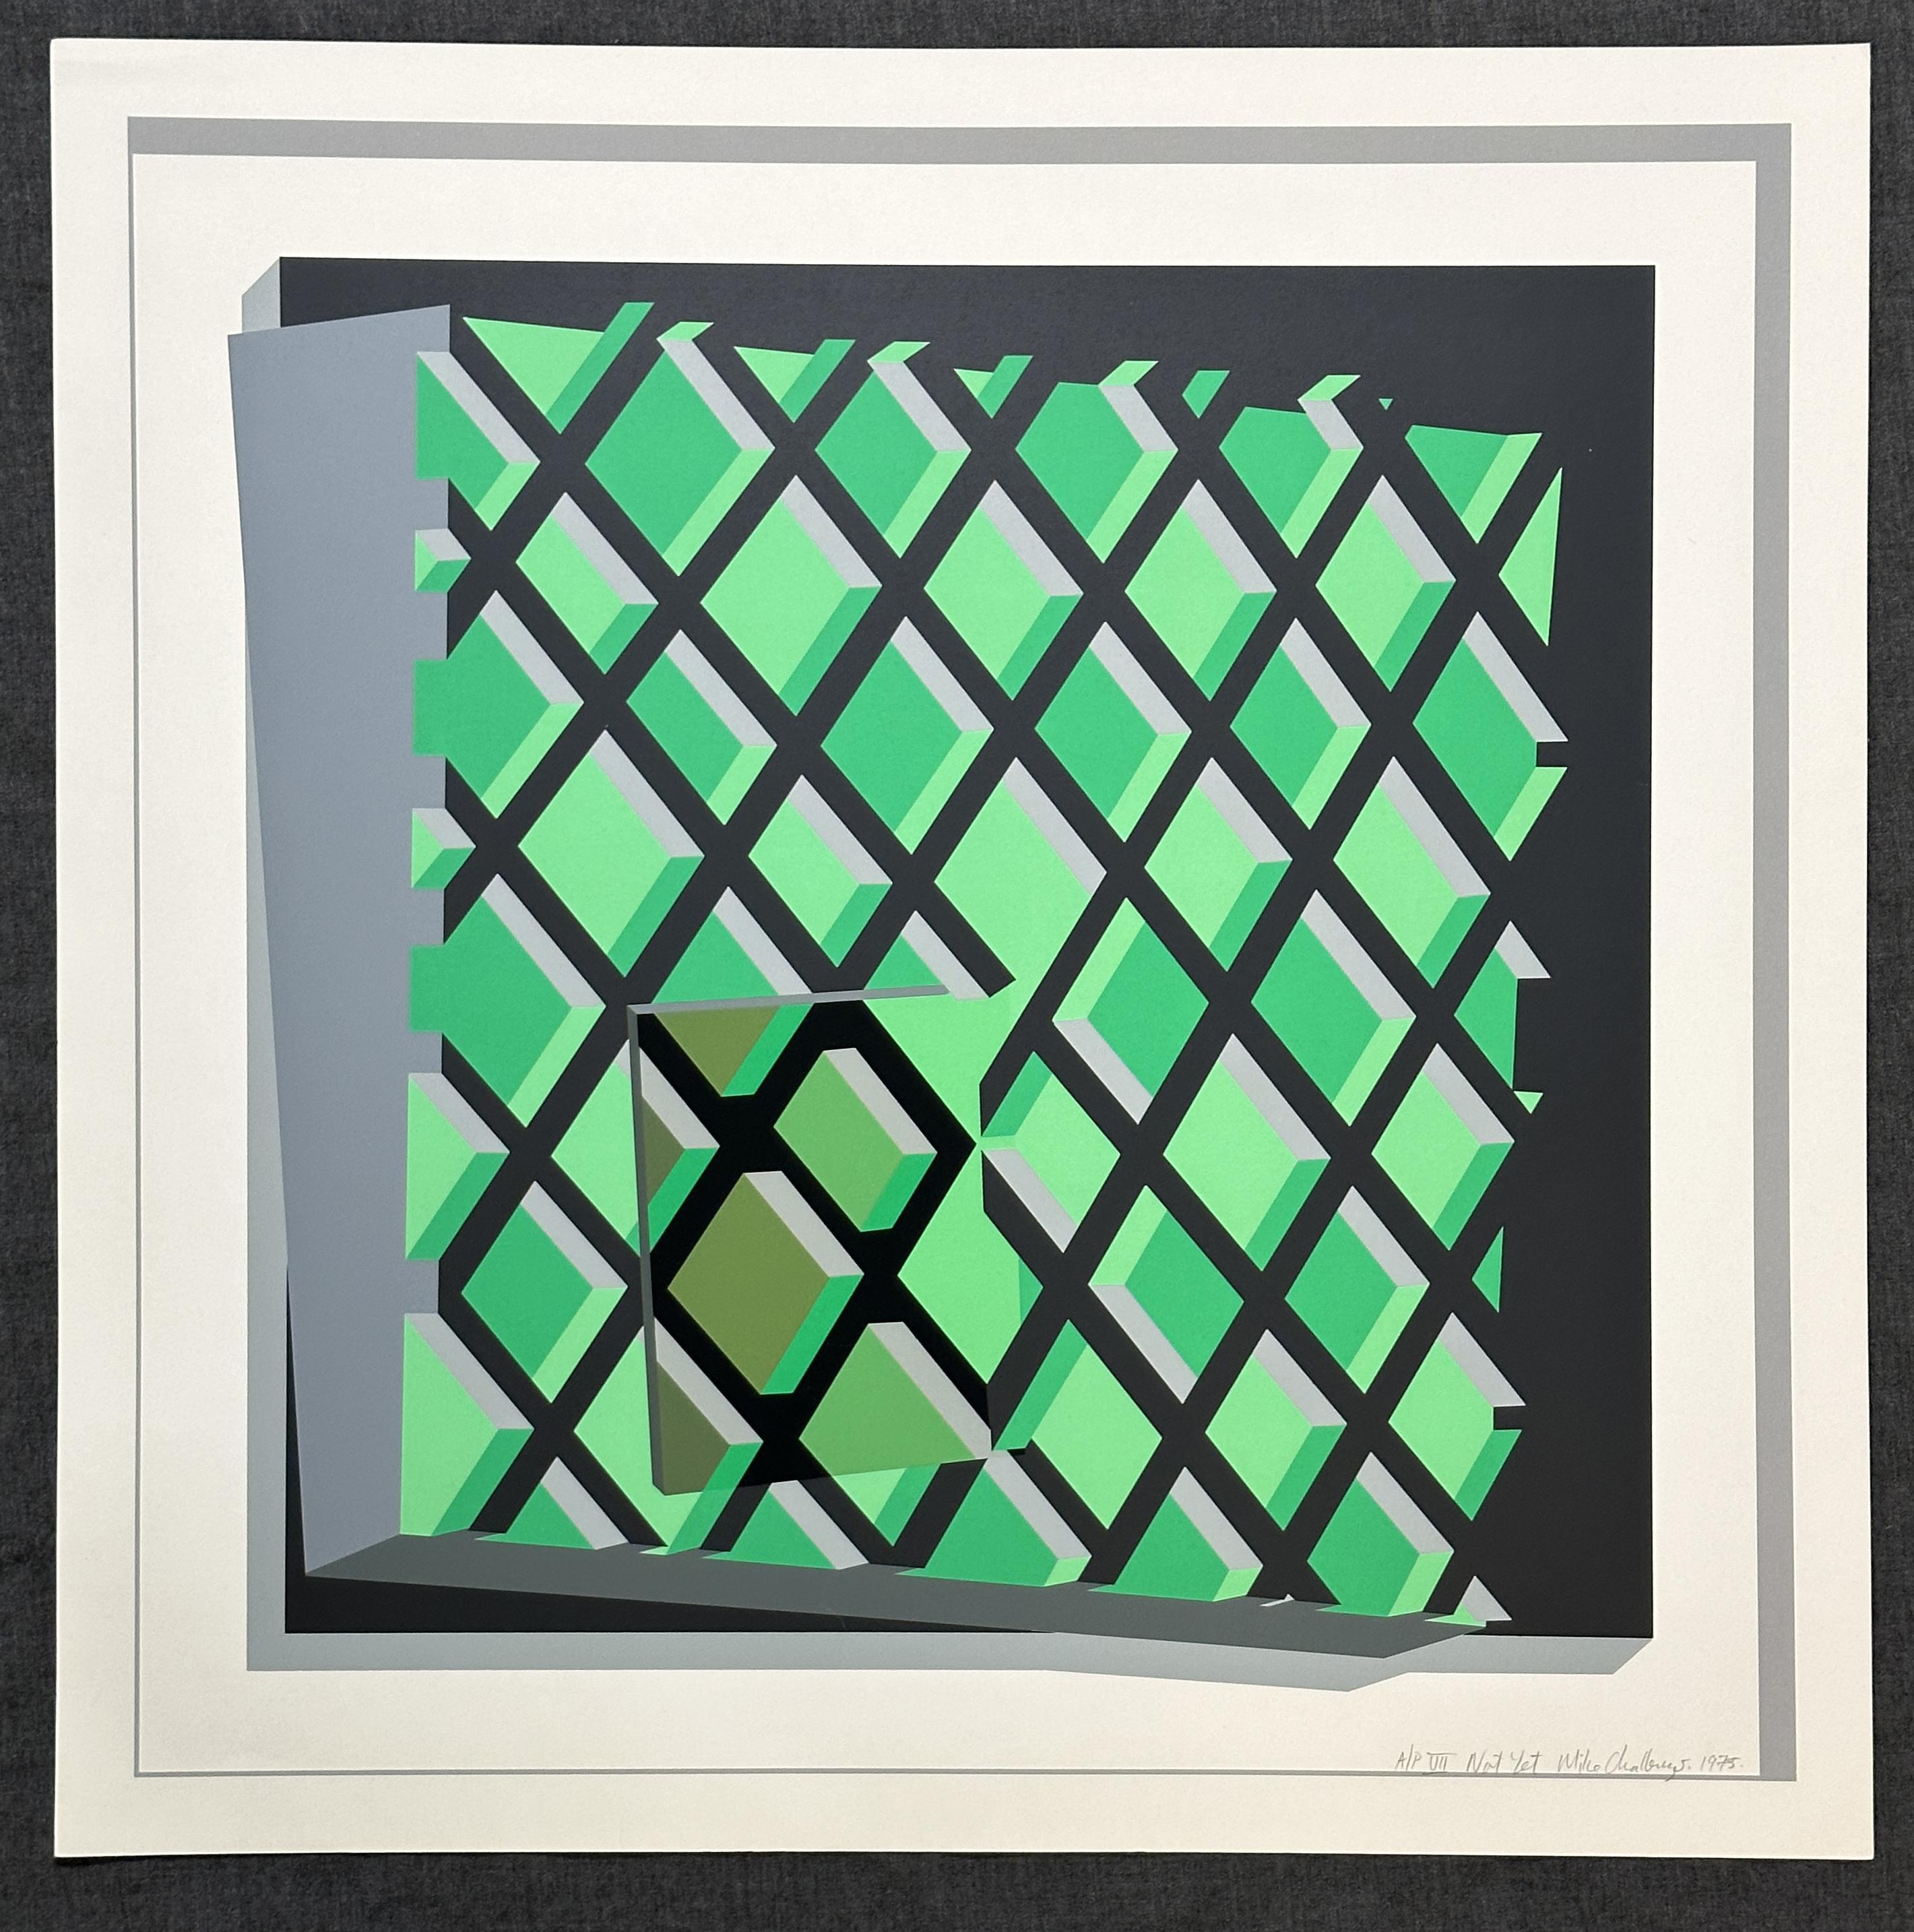 Michael Challenger
Not Yet - 1979
Print - Silkscreen   25'' x 25''
Edition: Signed in pencil, titled, dated and marked AP VIII

Challenger's work is a powerful interplay of op-art and constructivism. His graphic work evokes the counter-play of